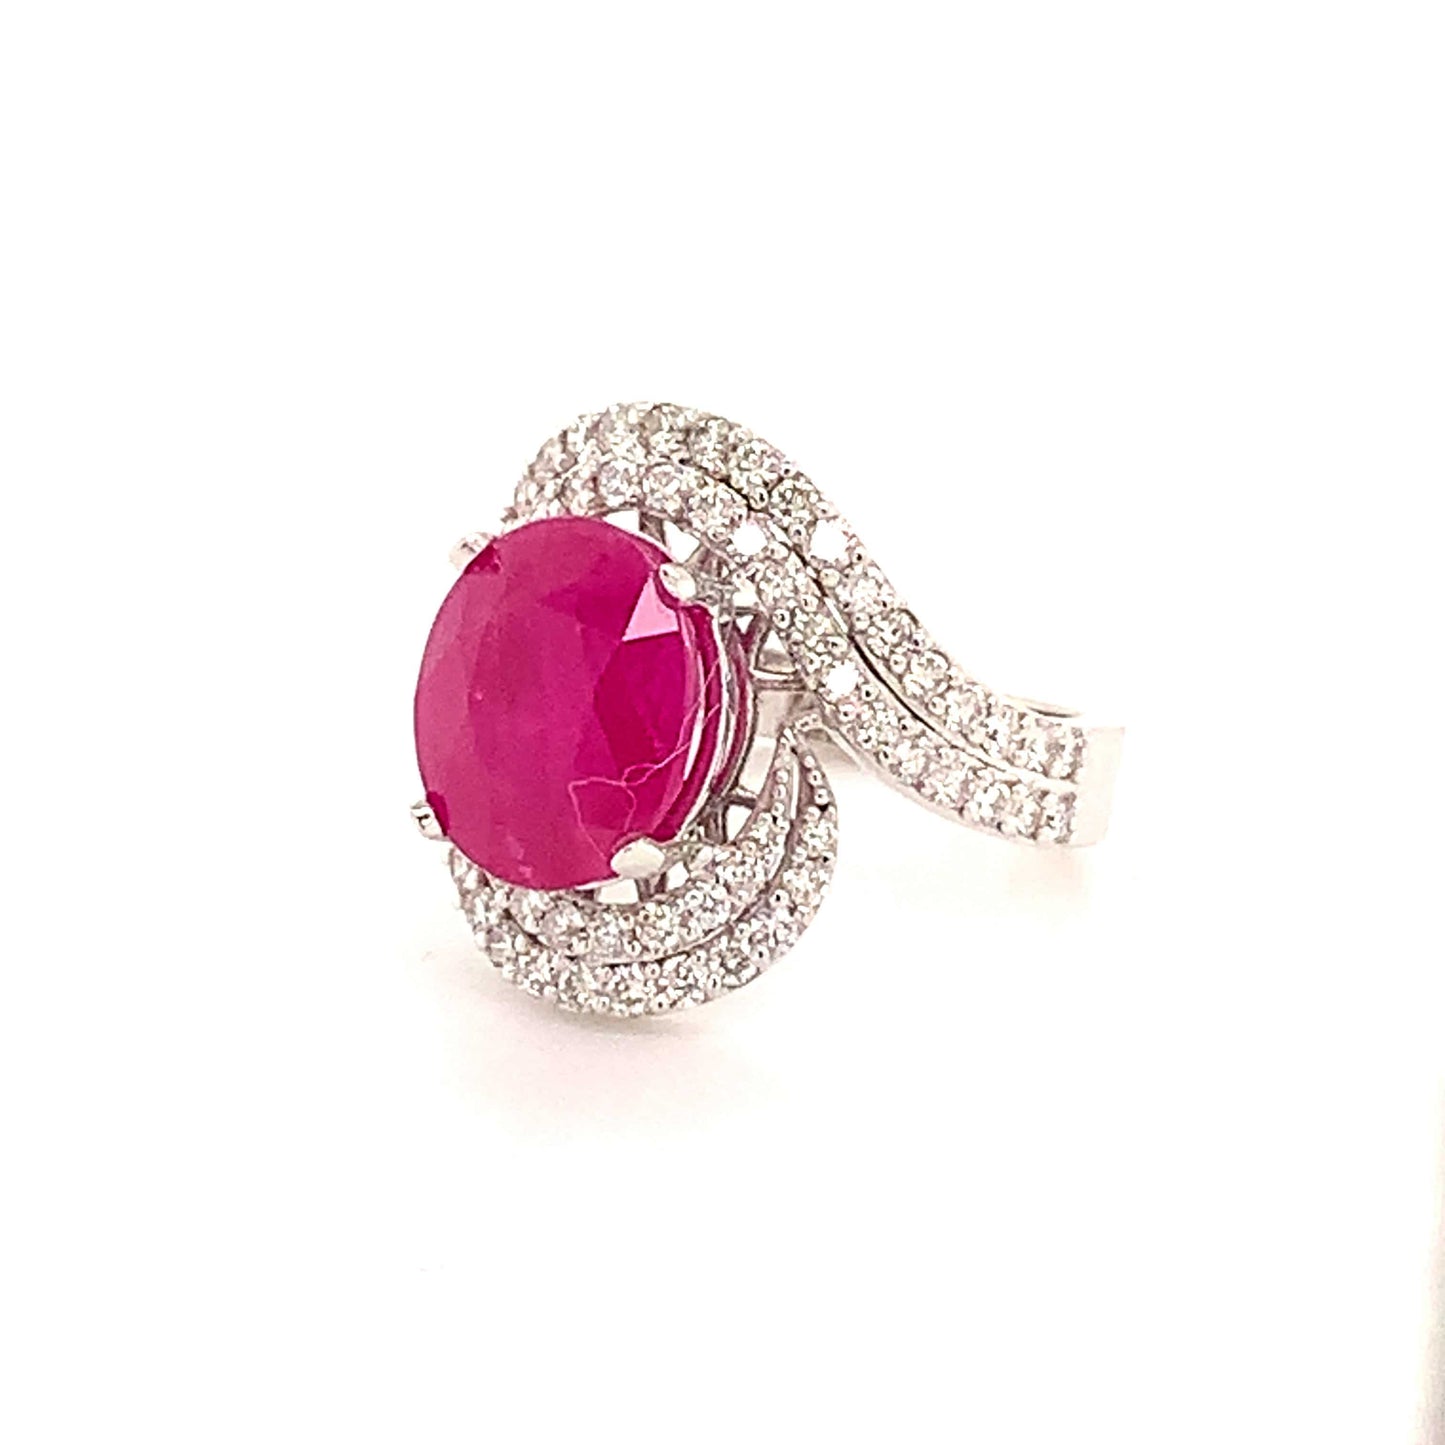 Natural Ruby Diamond Ring 14k Gold 6.32 TCW Size 6.5 GIA Certified $6,975 111872 - Certified Estate Jewelry